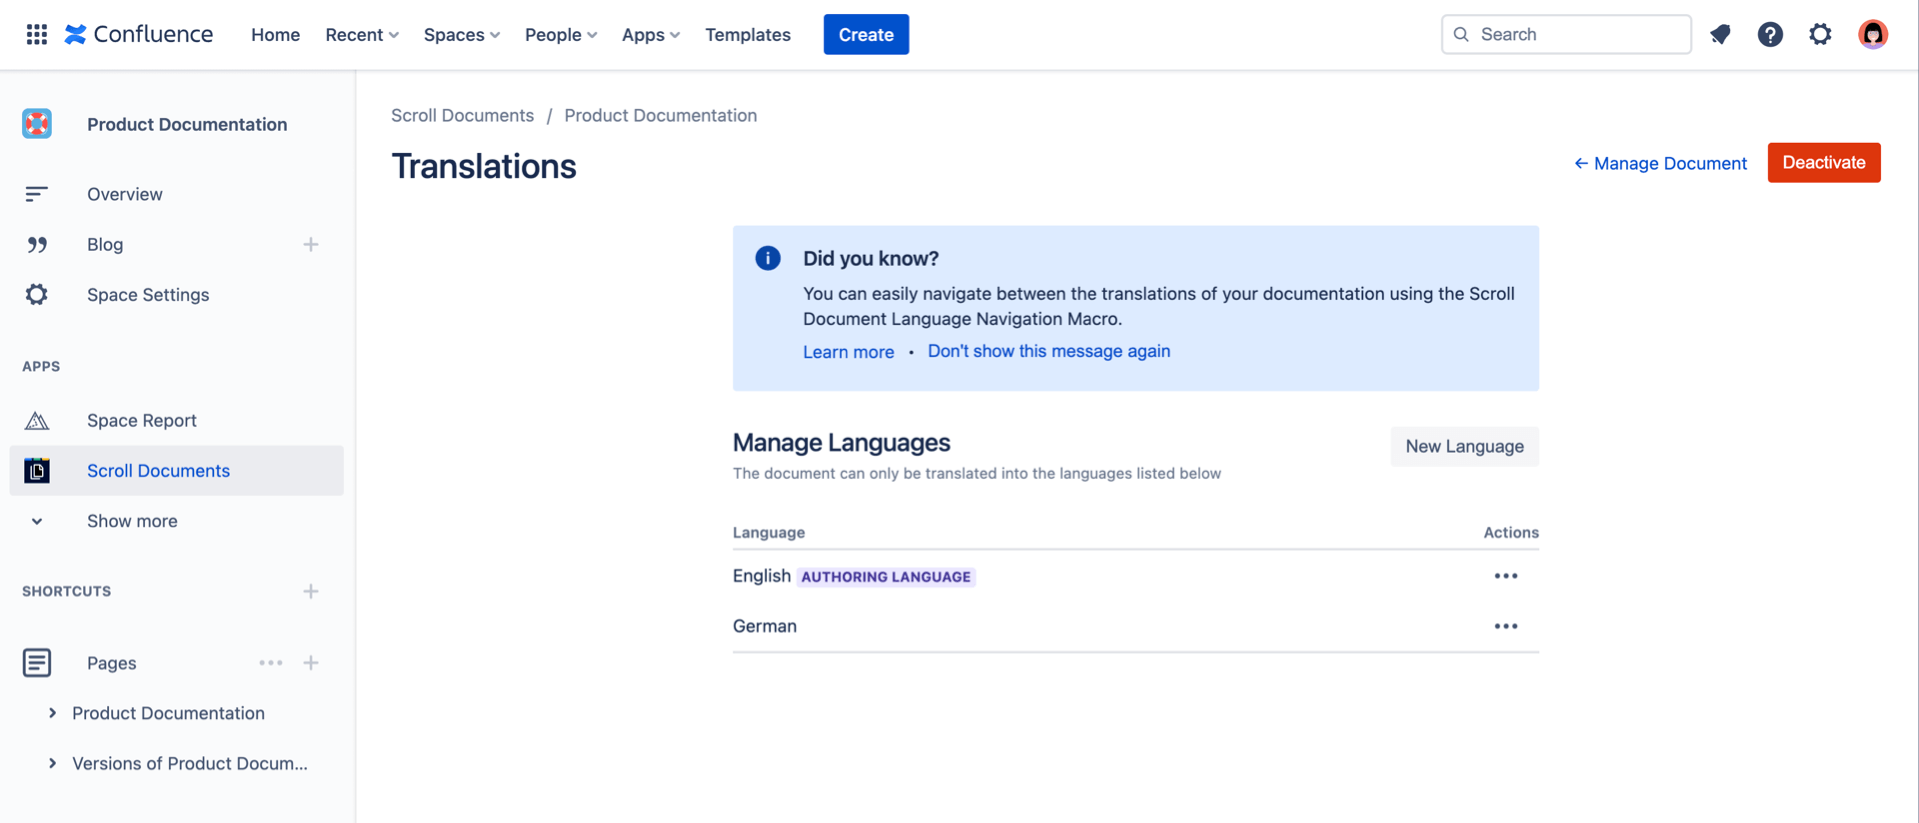 Language Manager with English as default language and German as secondary language